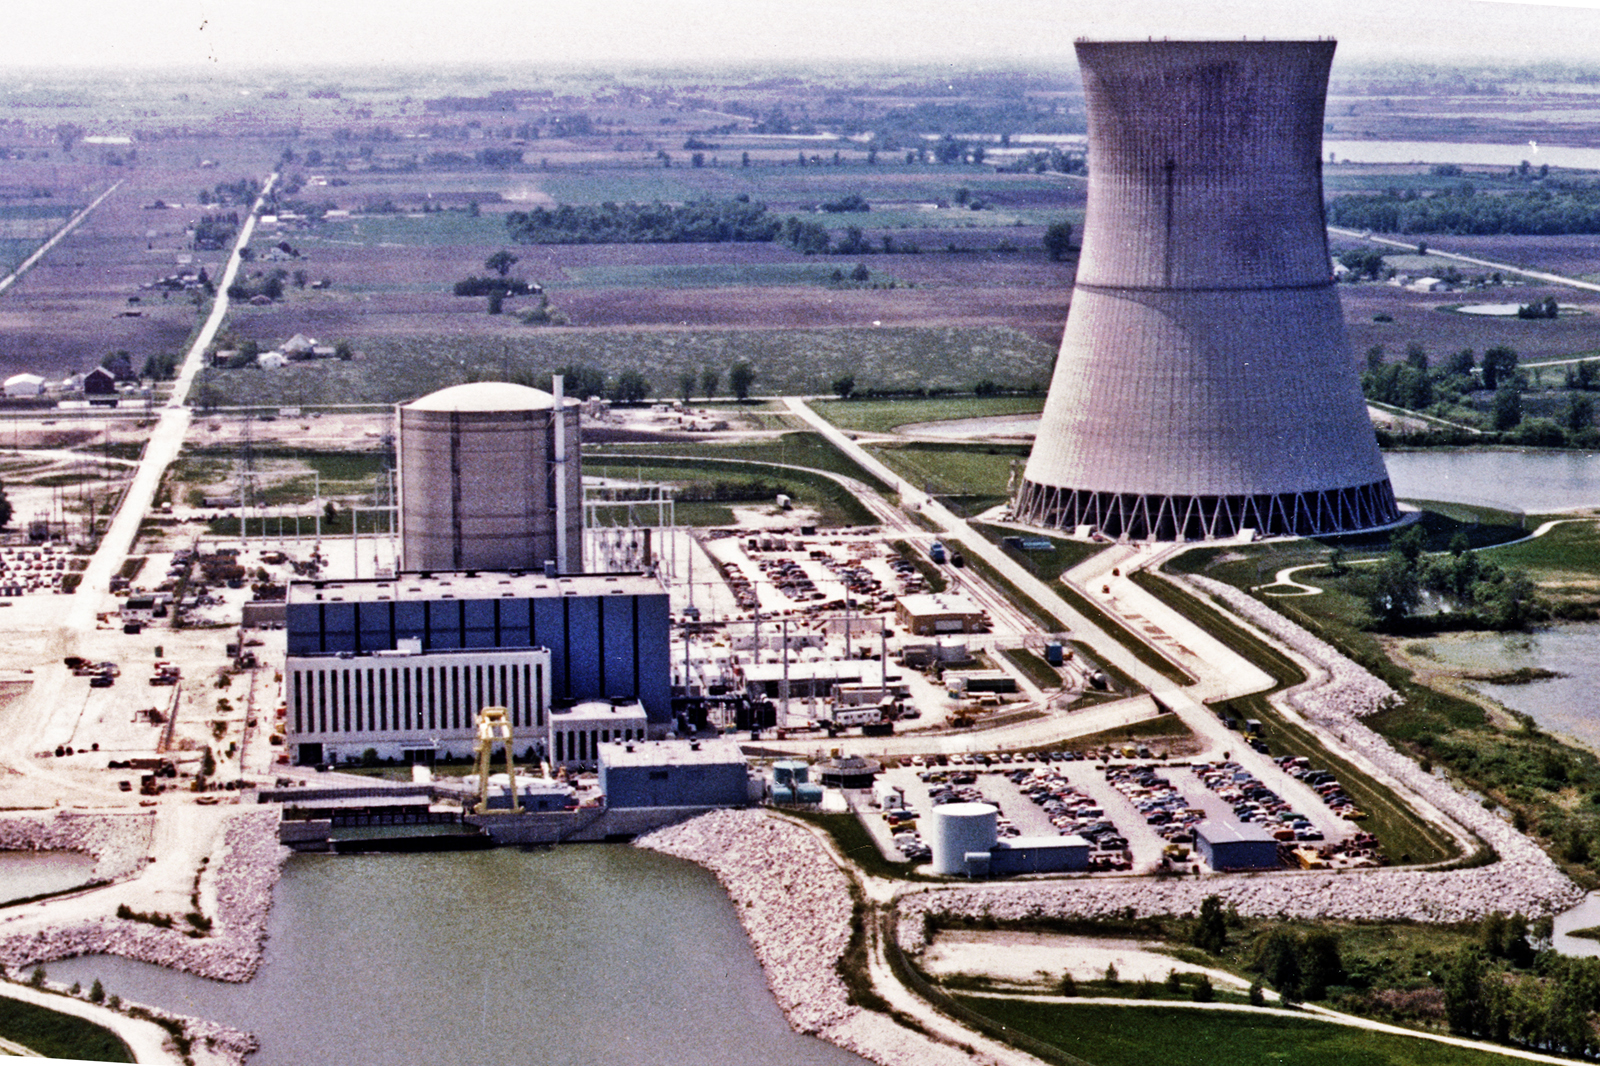 FirstEnergy's decrepit Davis-Besse reactor has been one of the least reliable reactors in the nation, with a long history of serious safety problems.